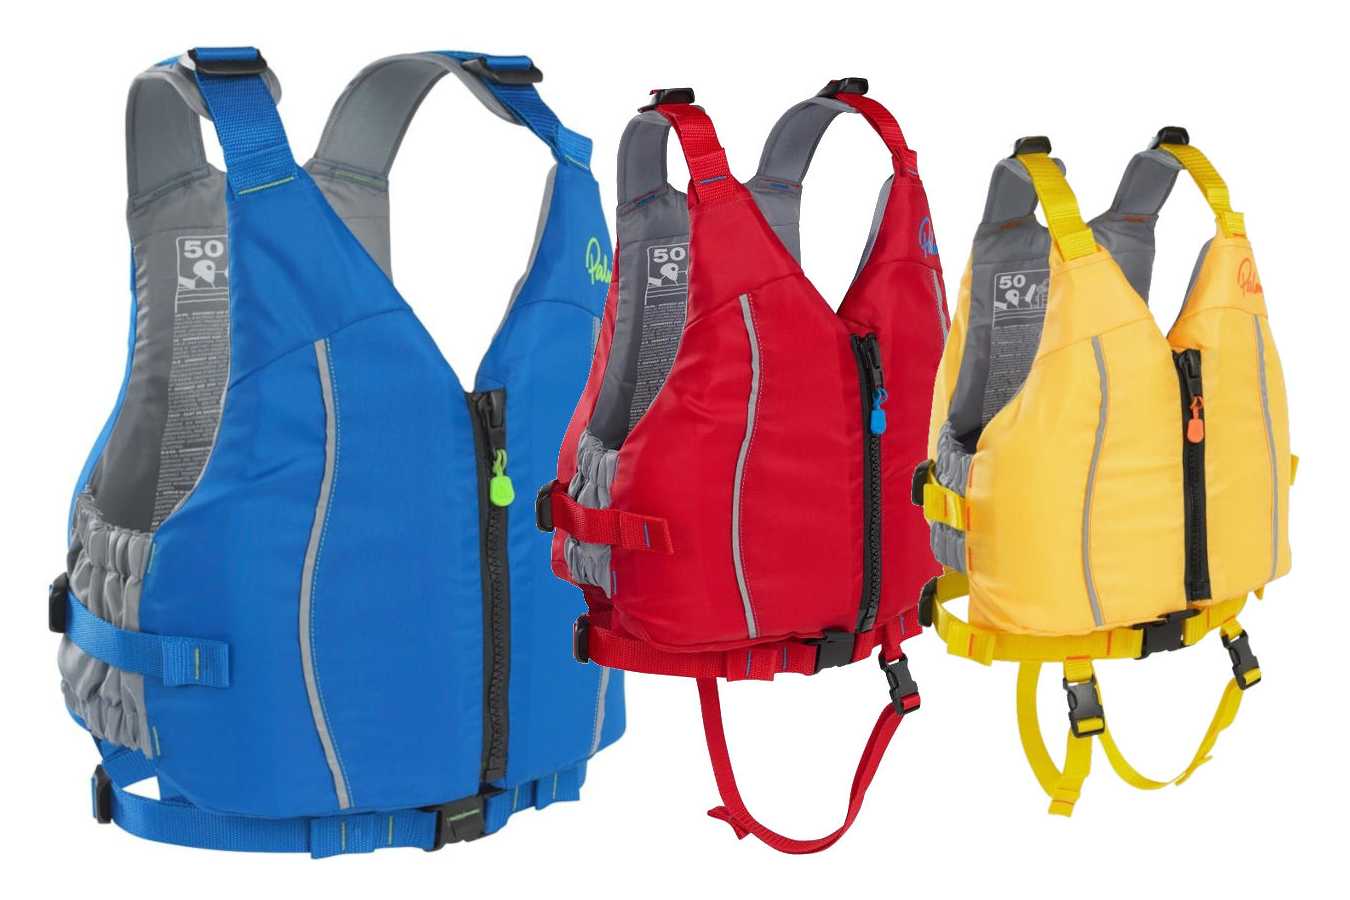 Buoyancy aids for kayaks and canoes